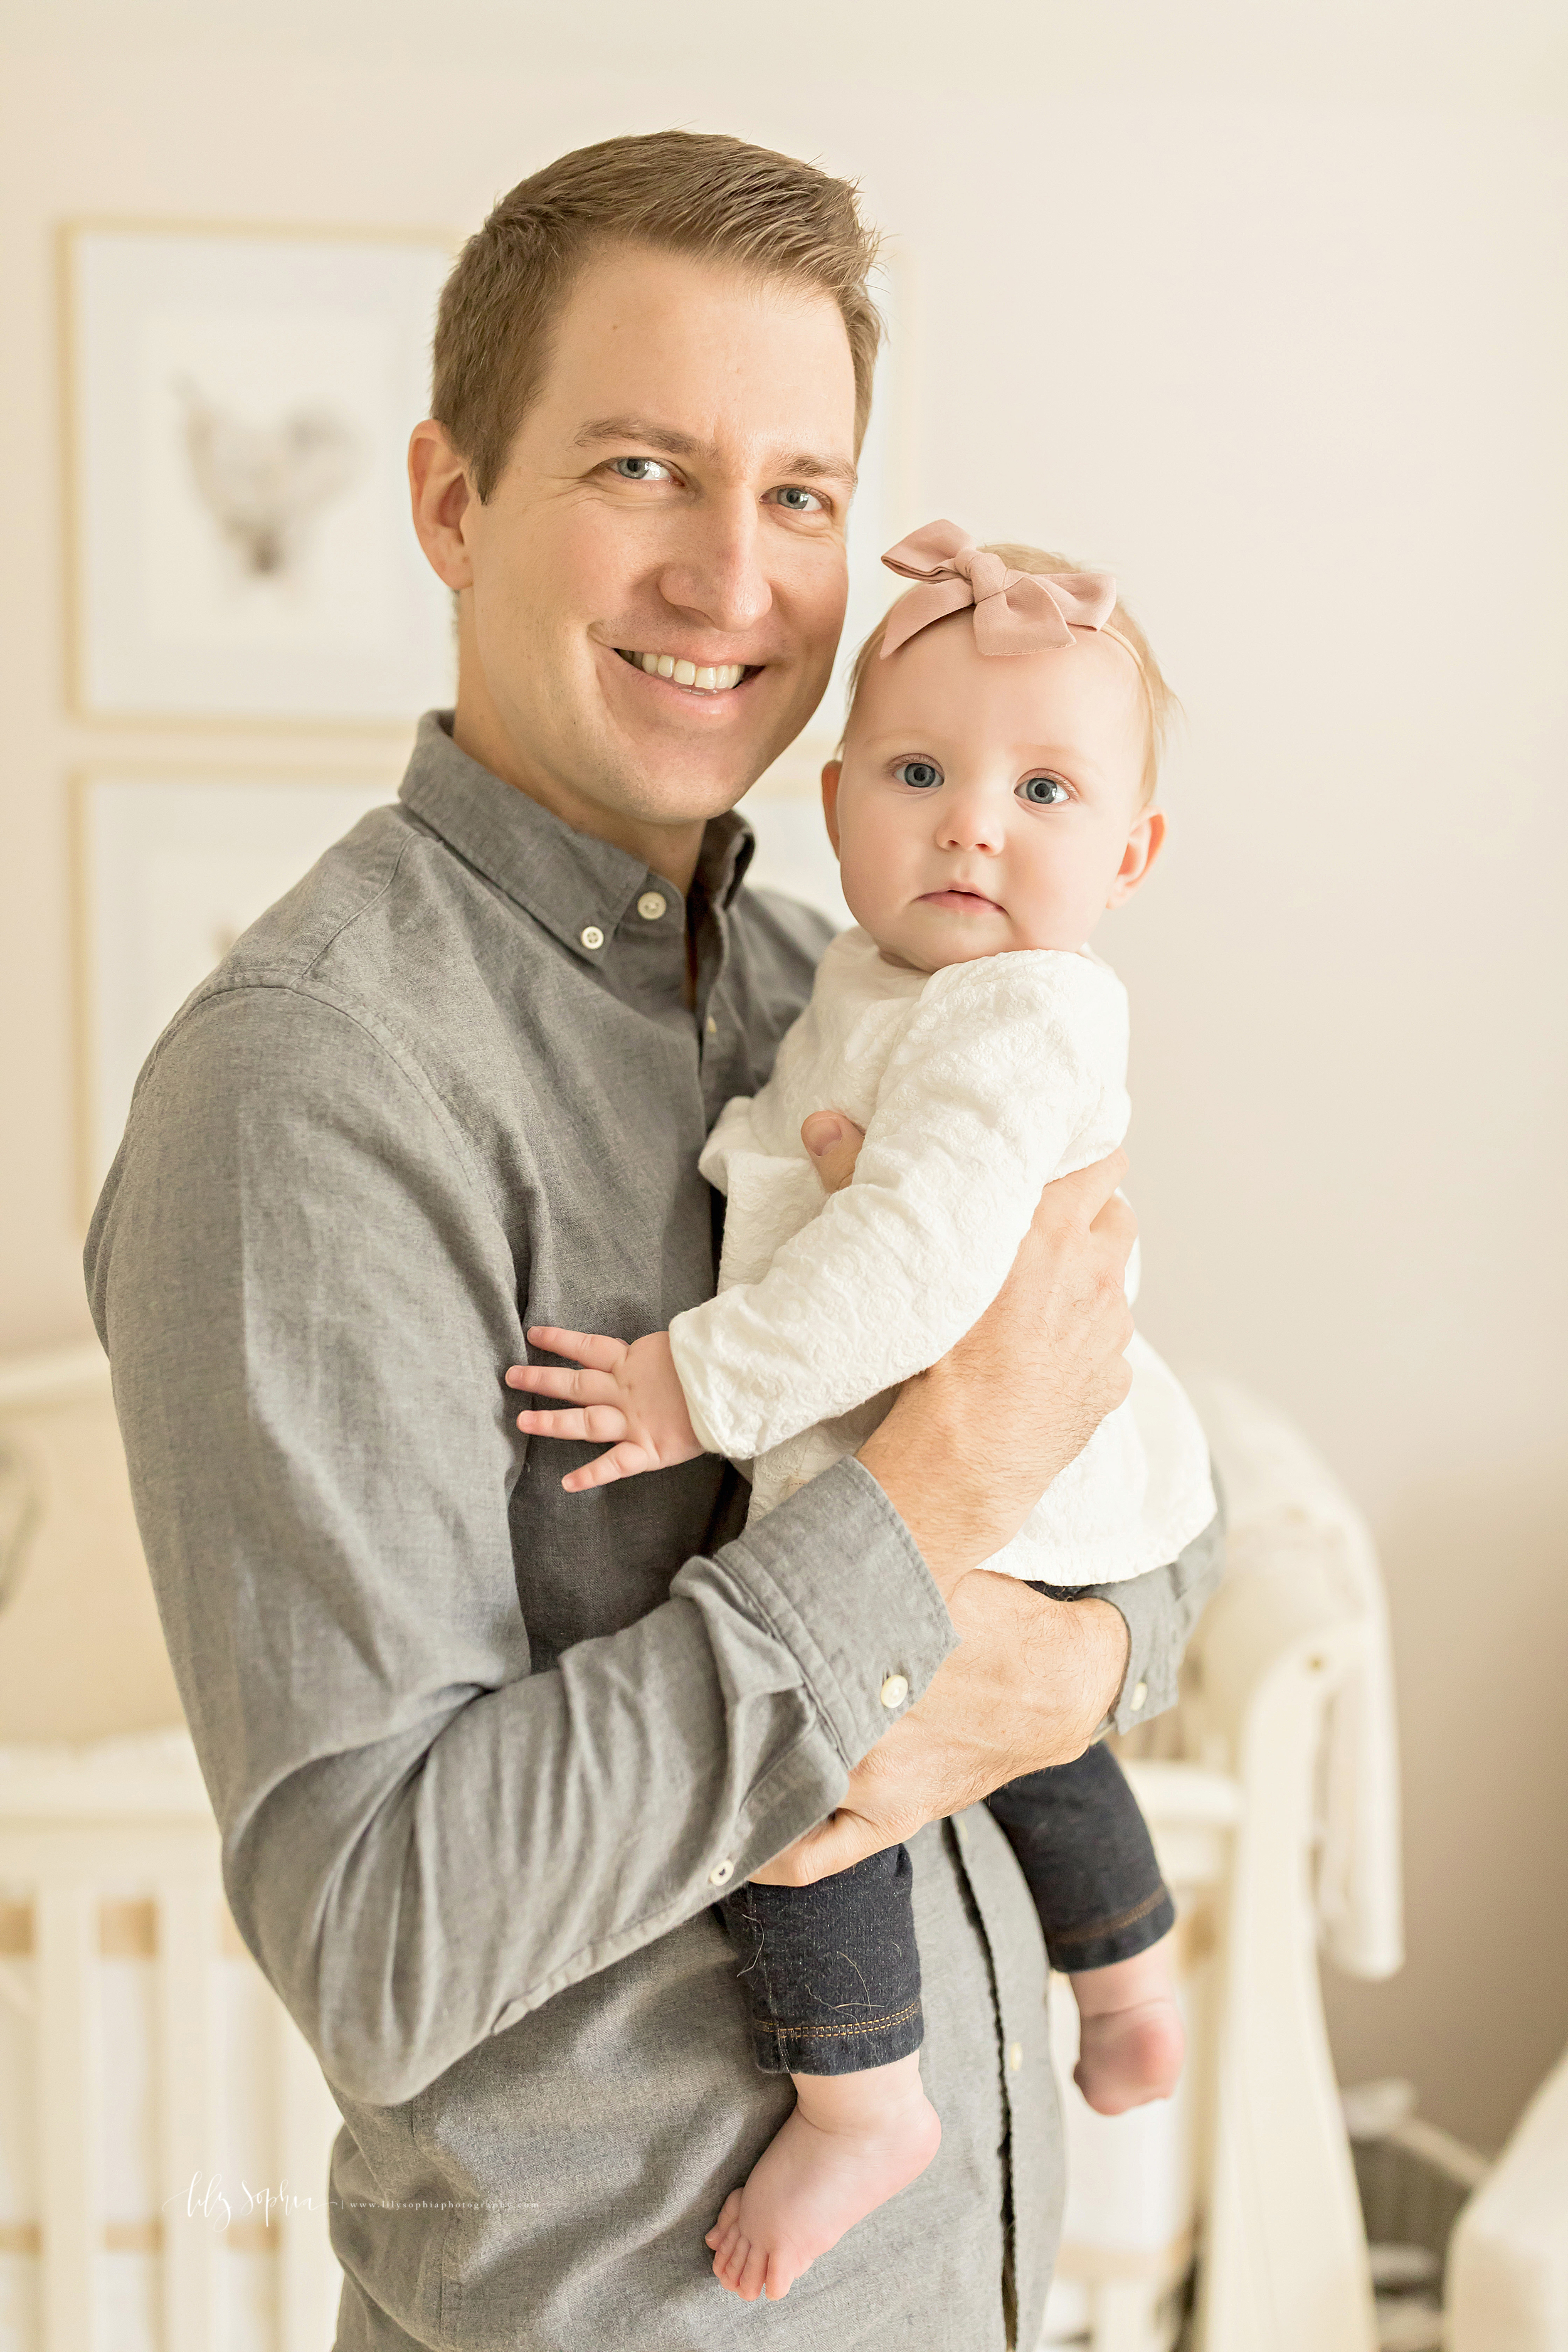 atlanta-midtown-brookhaven-ashford-dunwoody-virginia-highlands-roswell-decatur-lily-sophia-photography-in-home-six-month-milestone-family-lifestyle-session-sandy-springs_0669.jpg